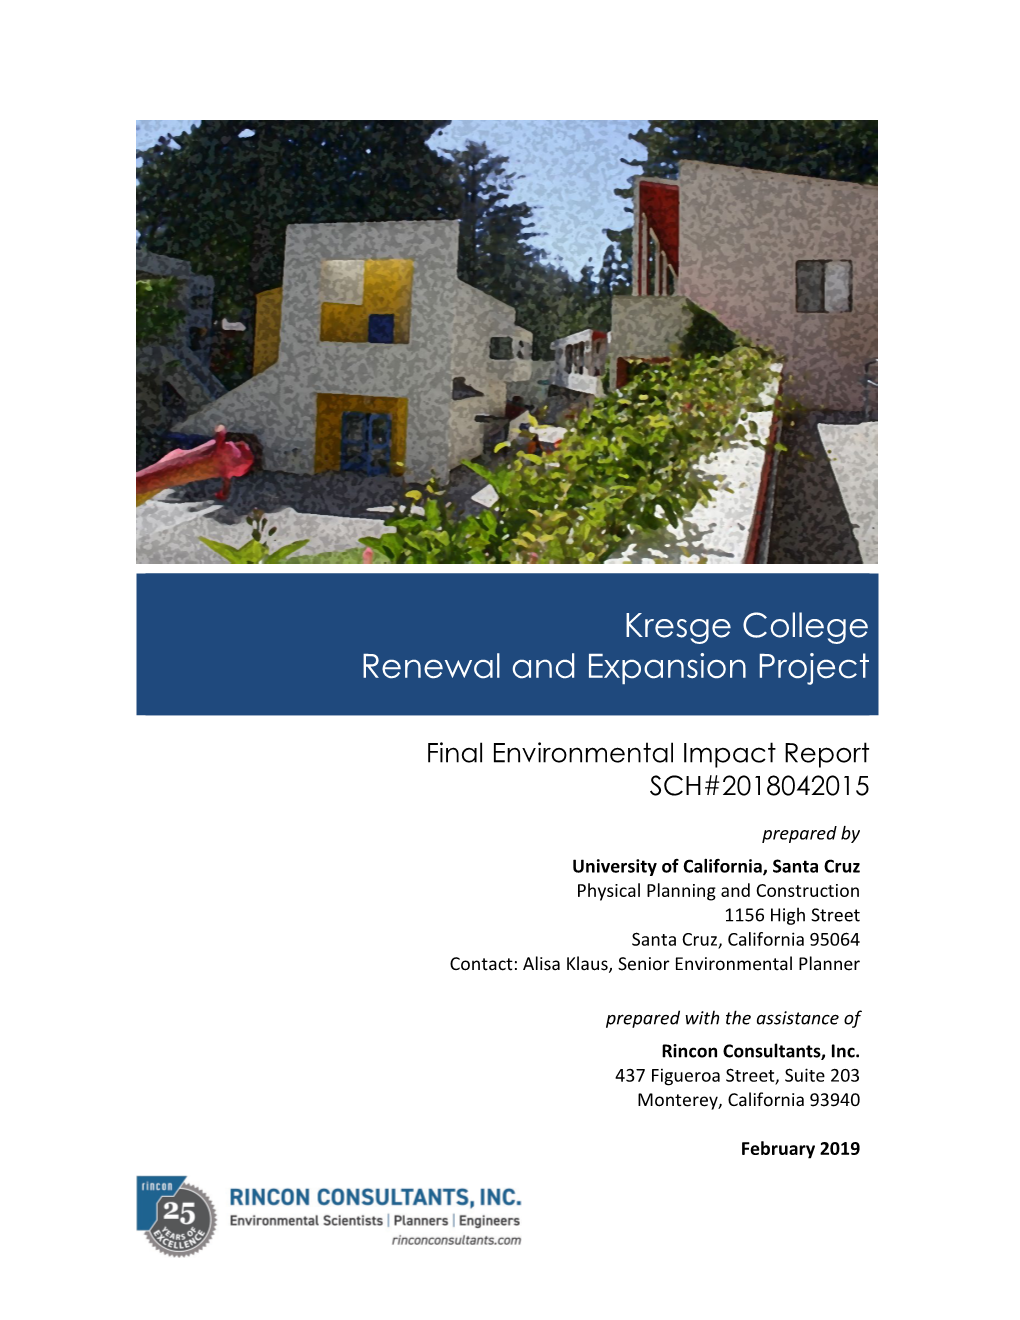 Kresge College Renewal and Expansion Project